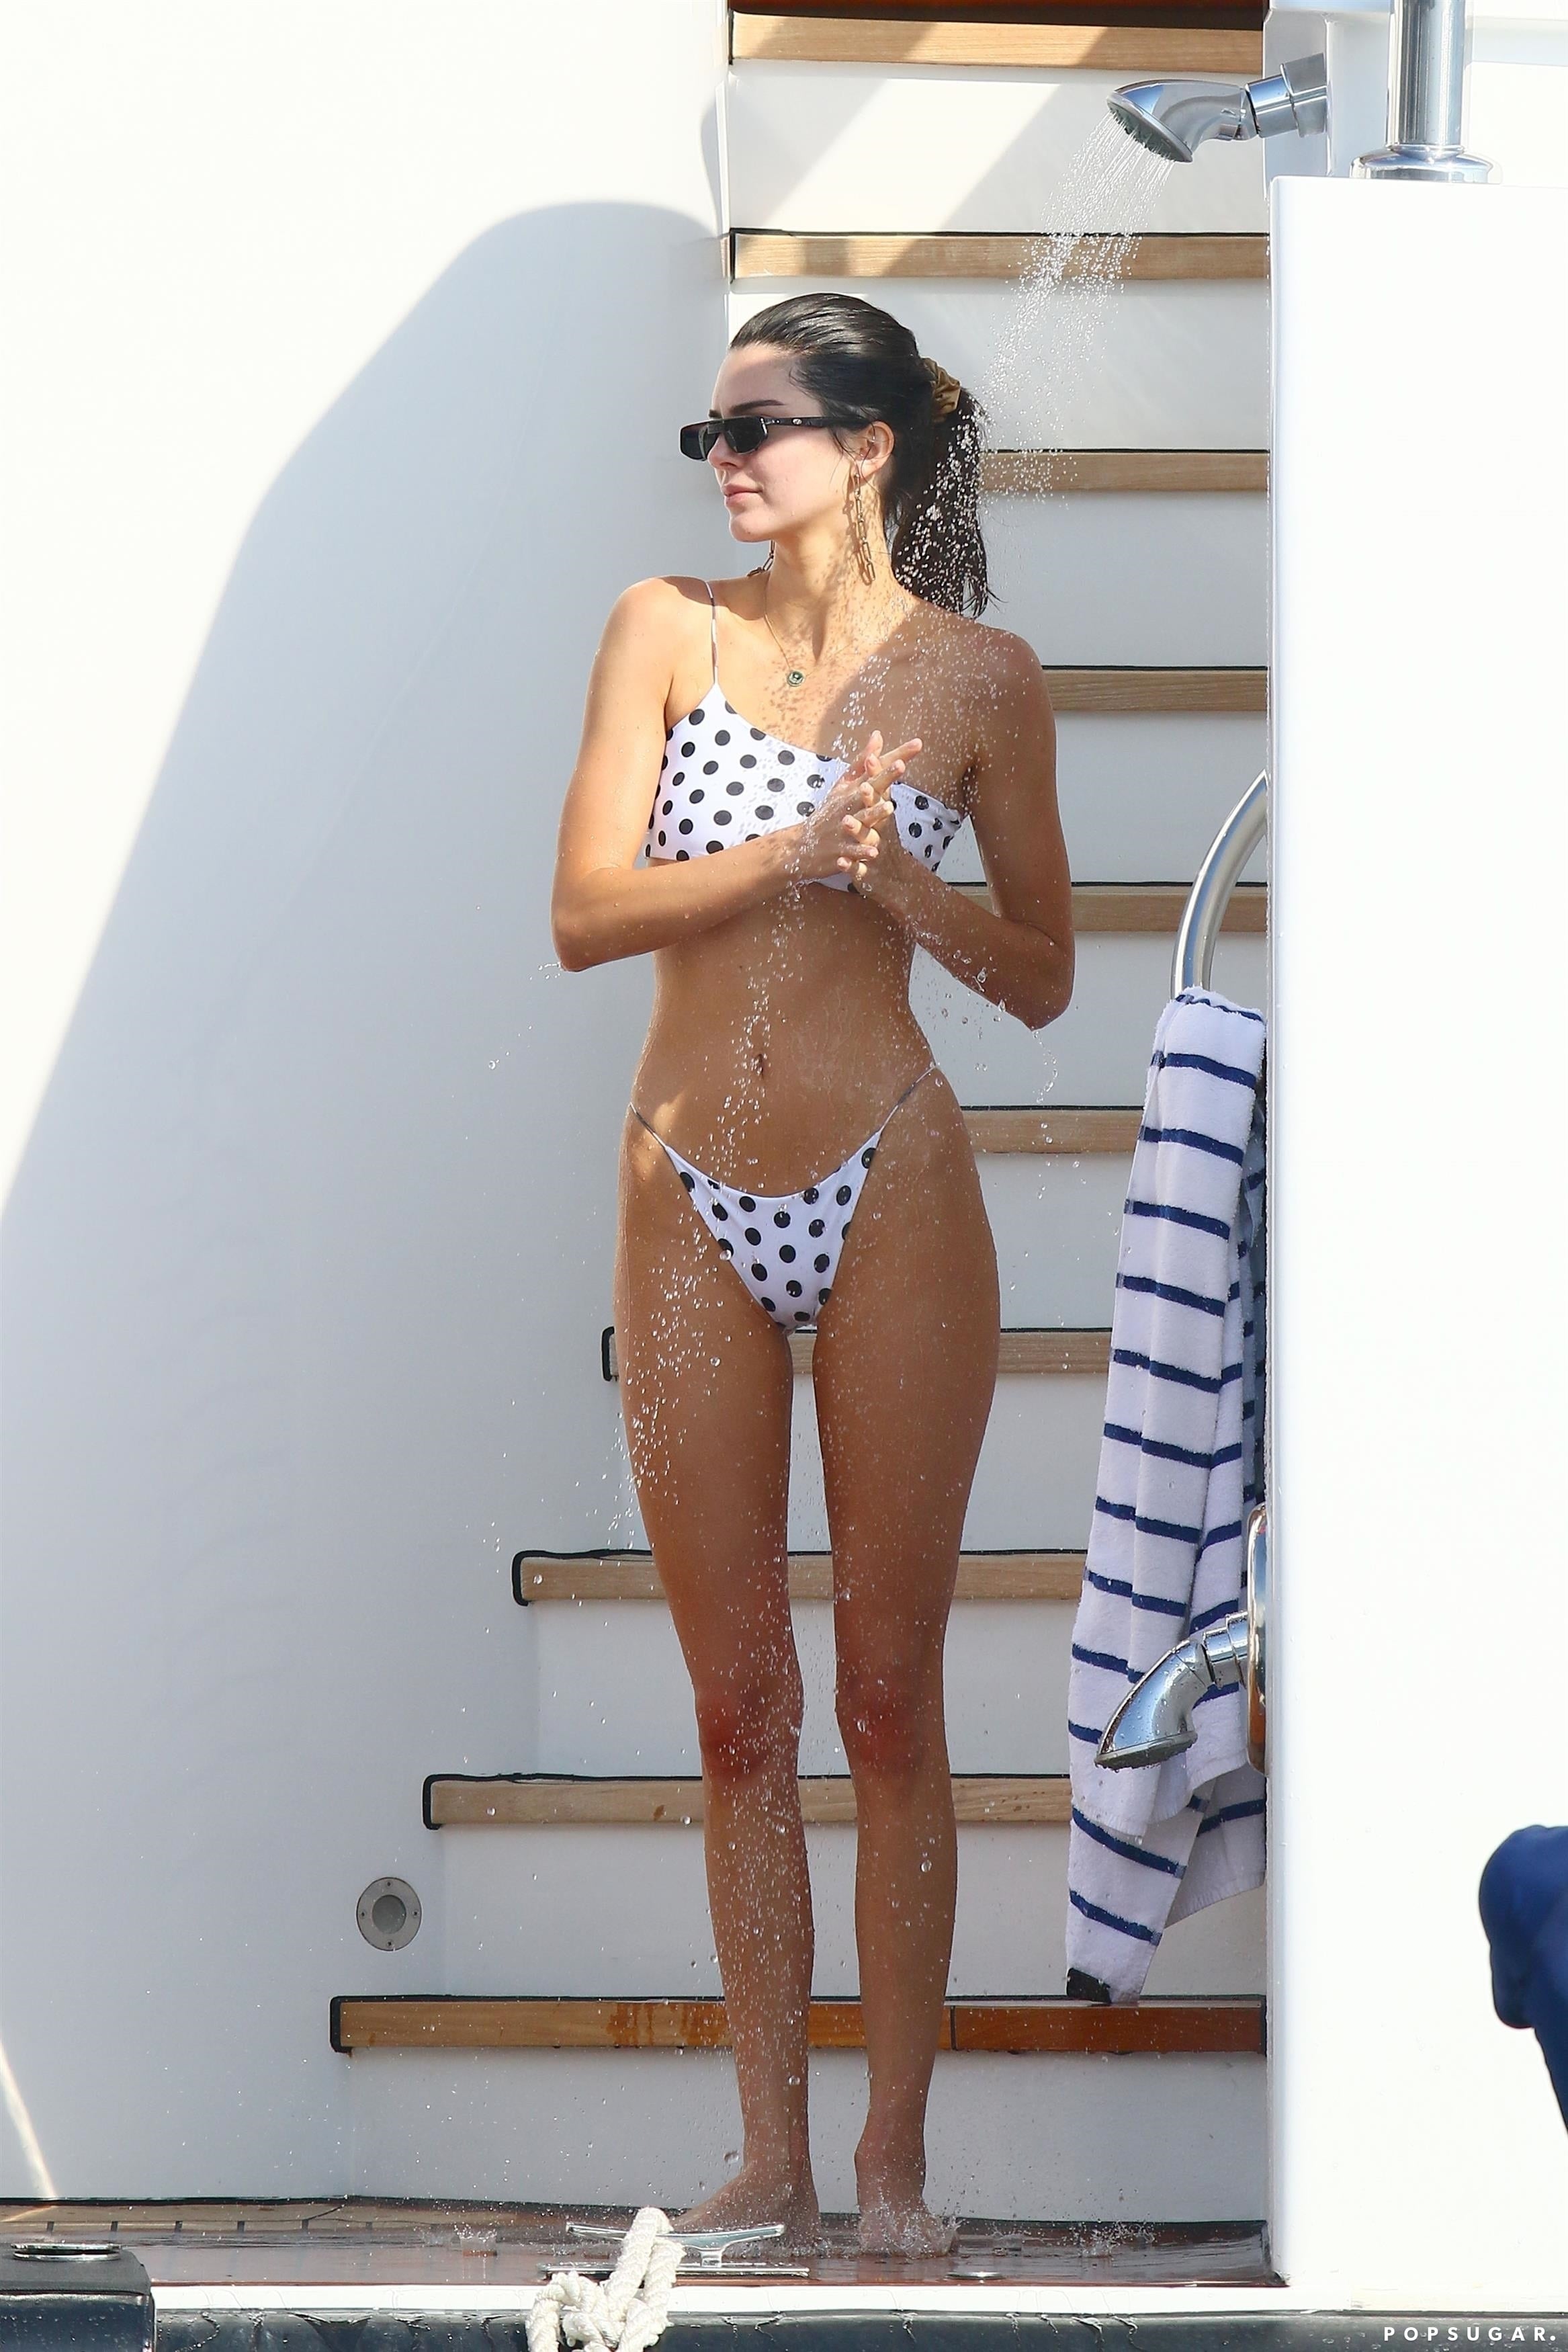 Kendall Jenner just hard-launched the itsy bitsy floss bikini